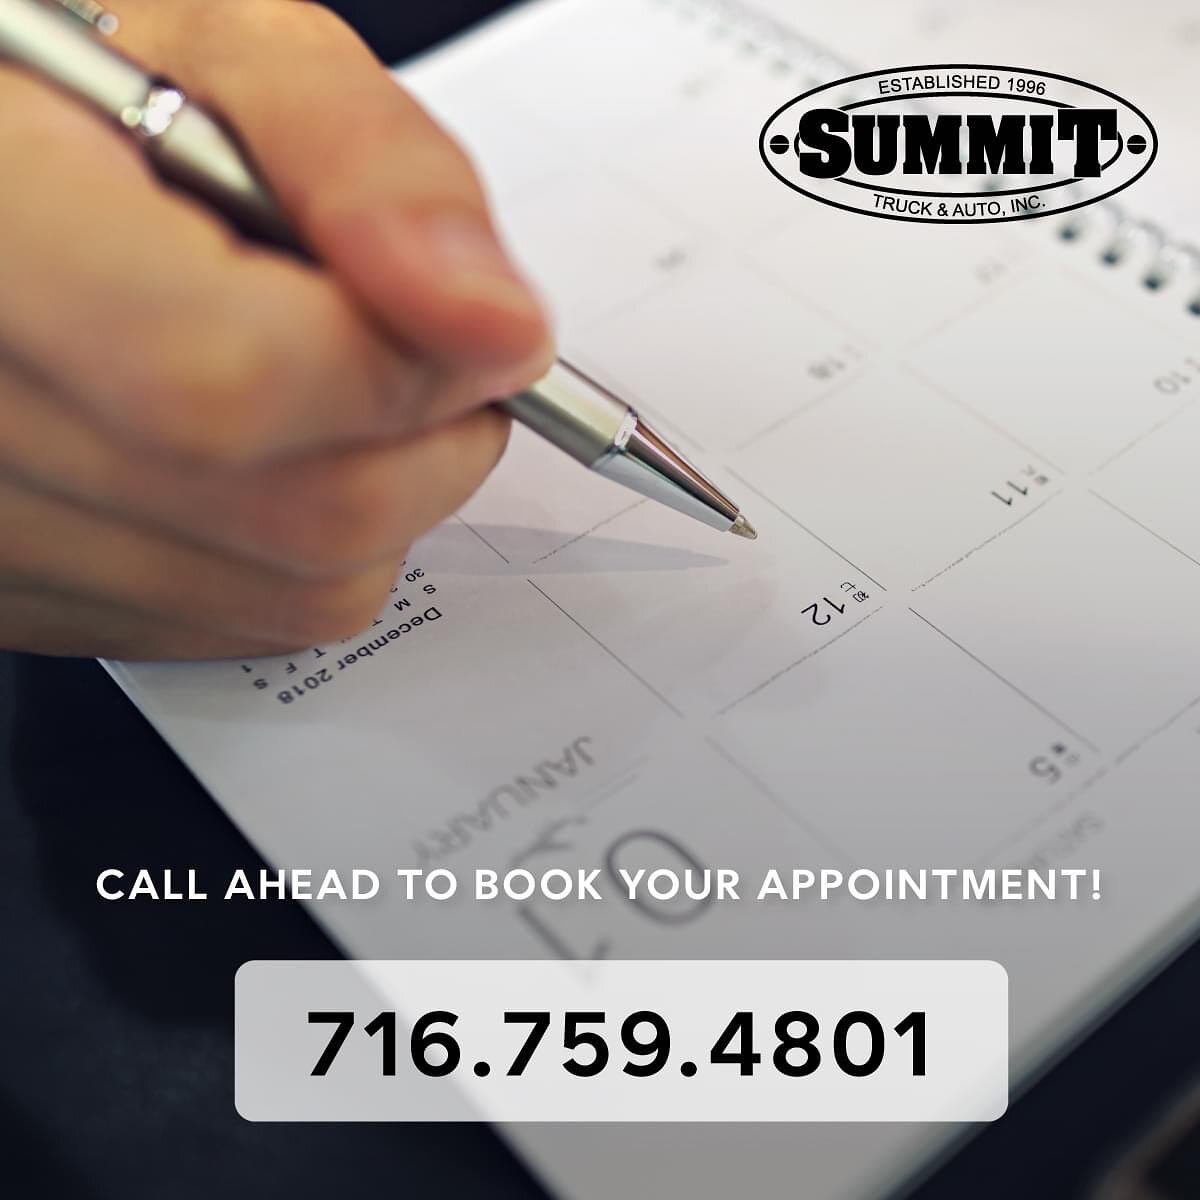 📲 Does your car need maintenance? Just a friendly reminder that we are currently booking out 10-14 days, call ahead to get on the schedule! 716.759.4801